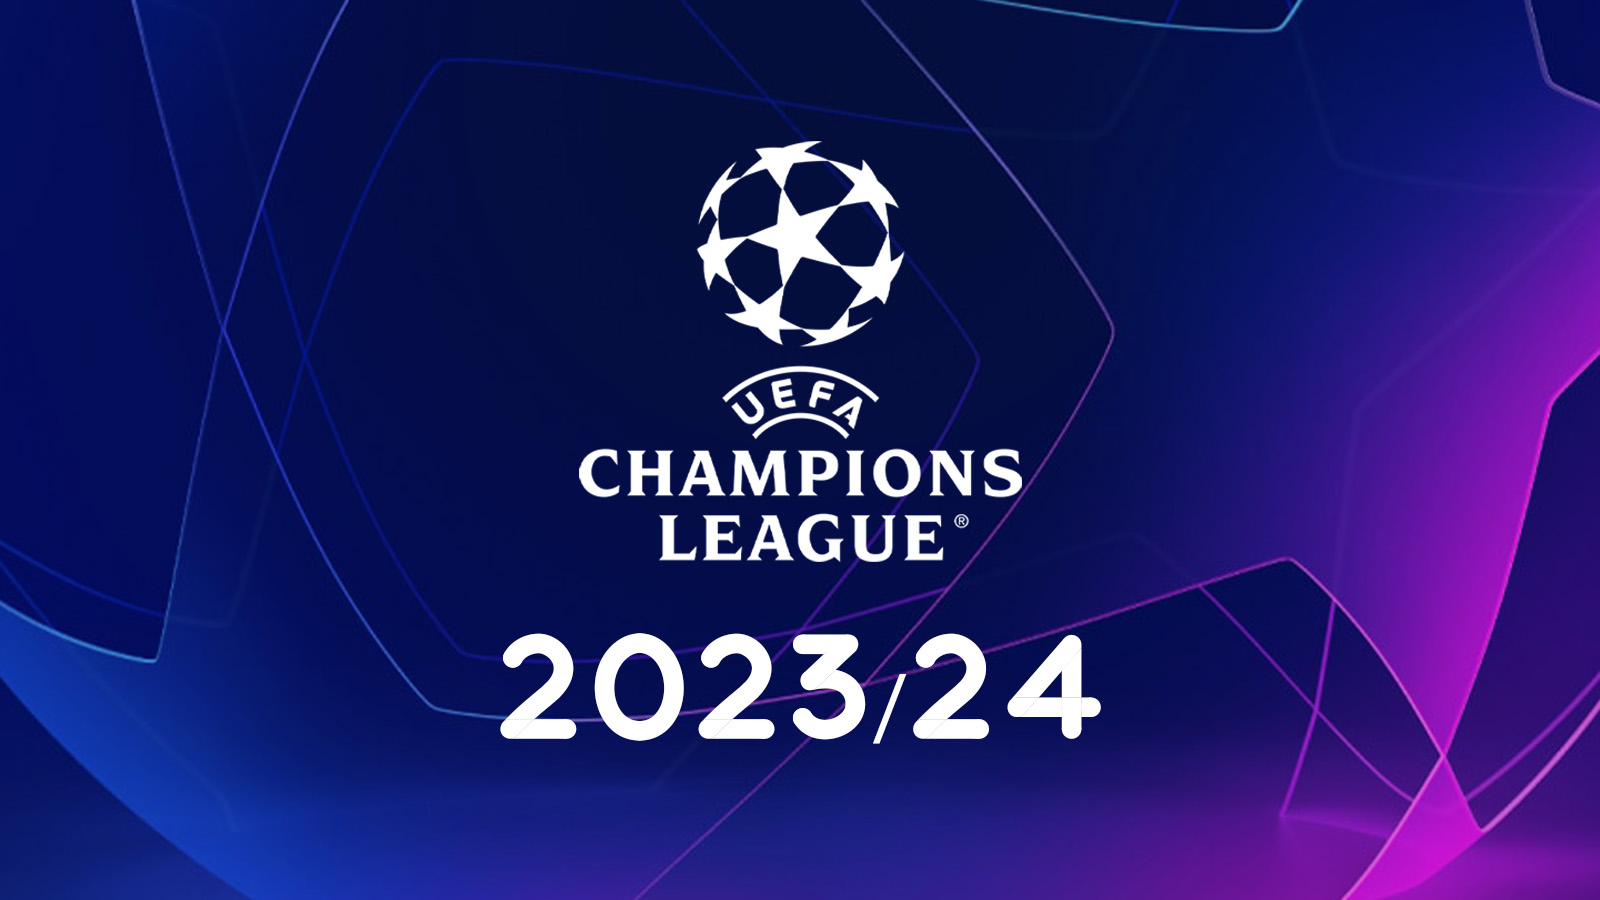 UEFA Champions League 2023/24 Fixture, Group Stage Draw